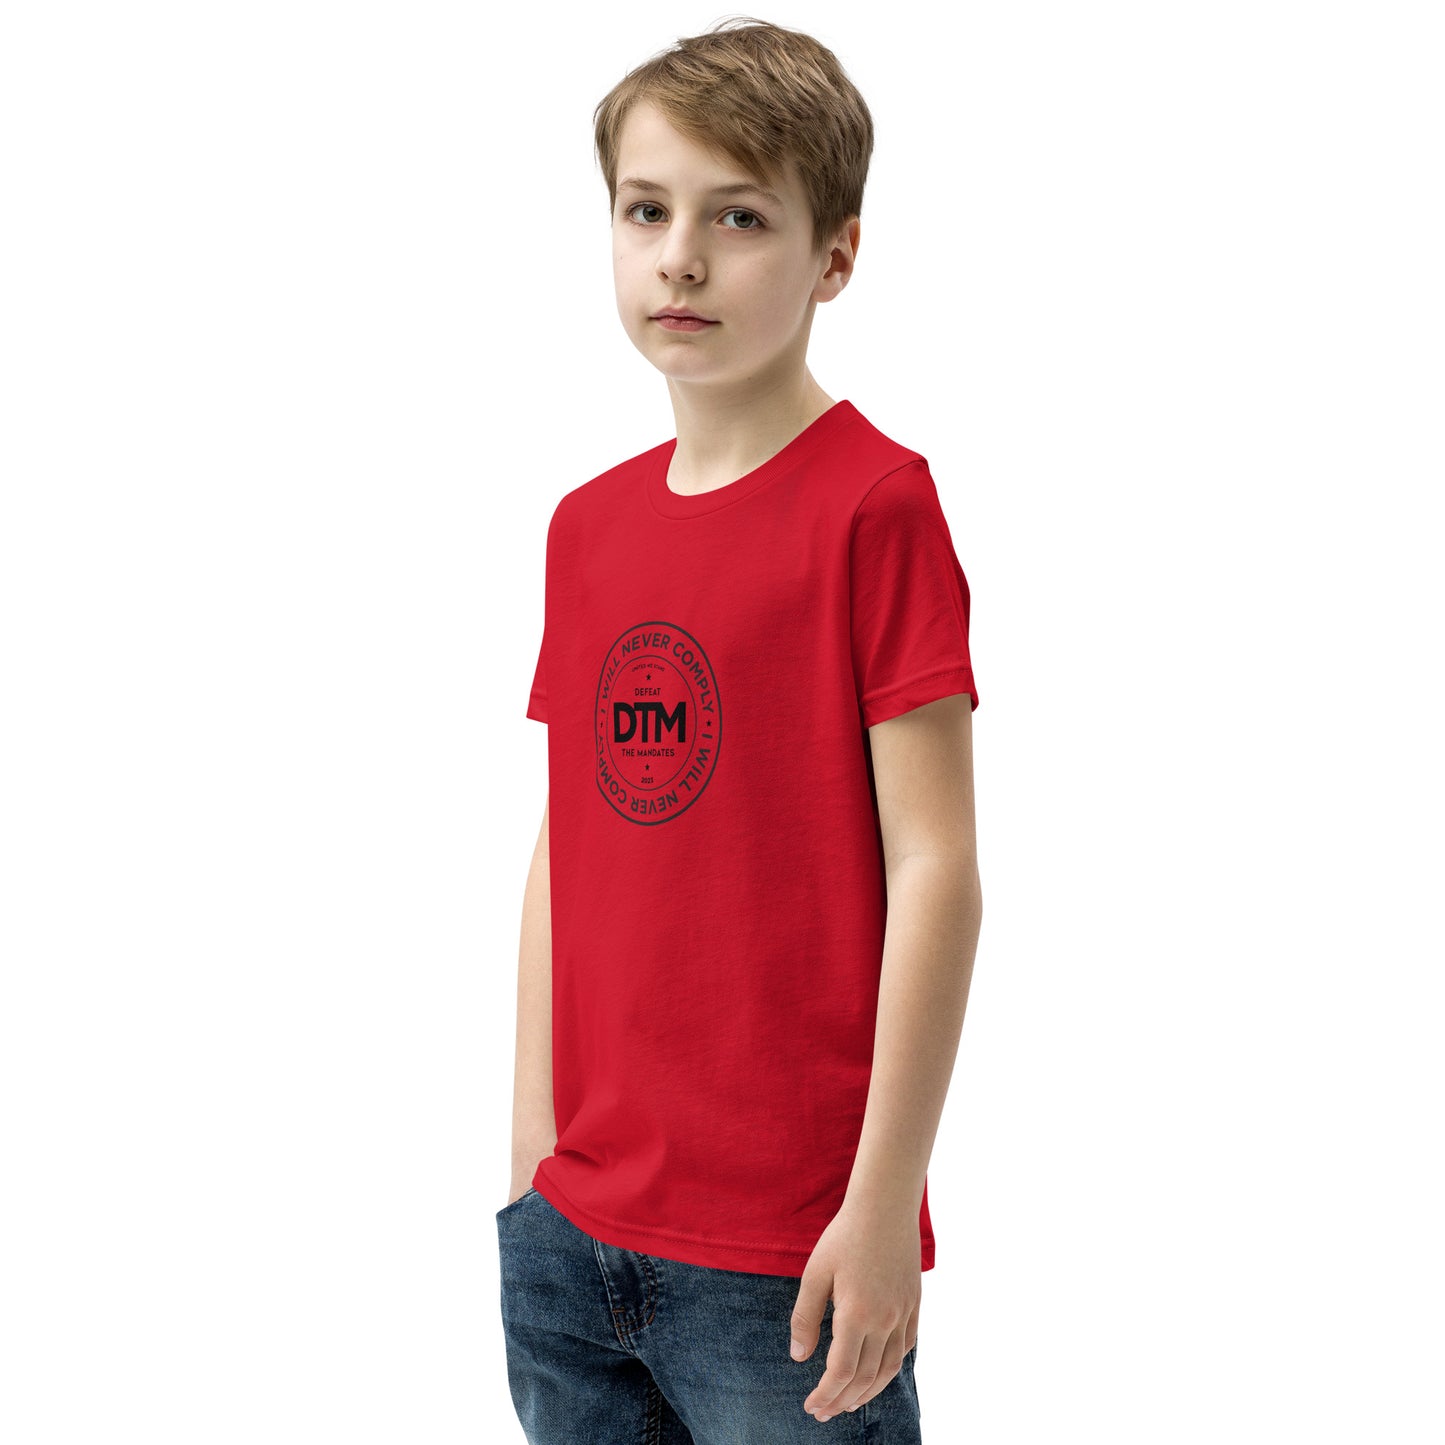 NEVER COMPLY Youth Short Sleeve T-Shirt